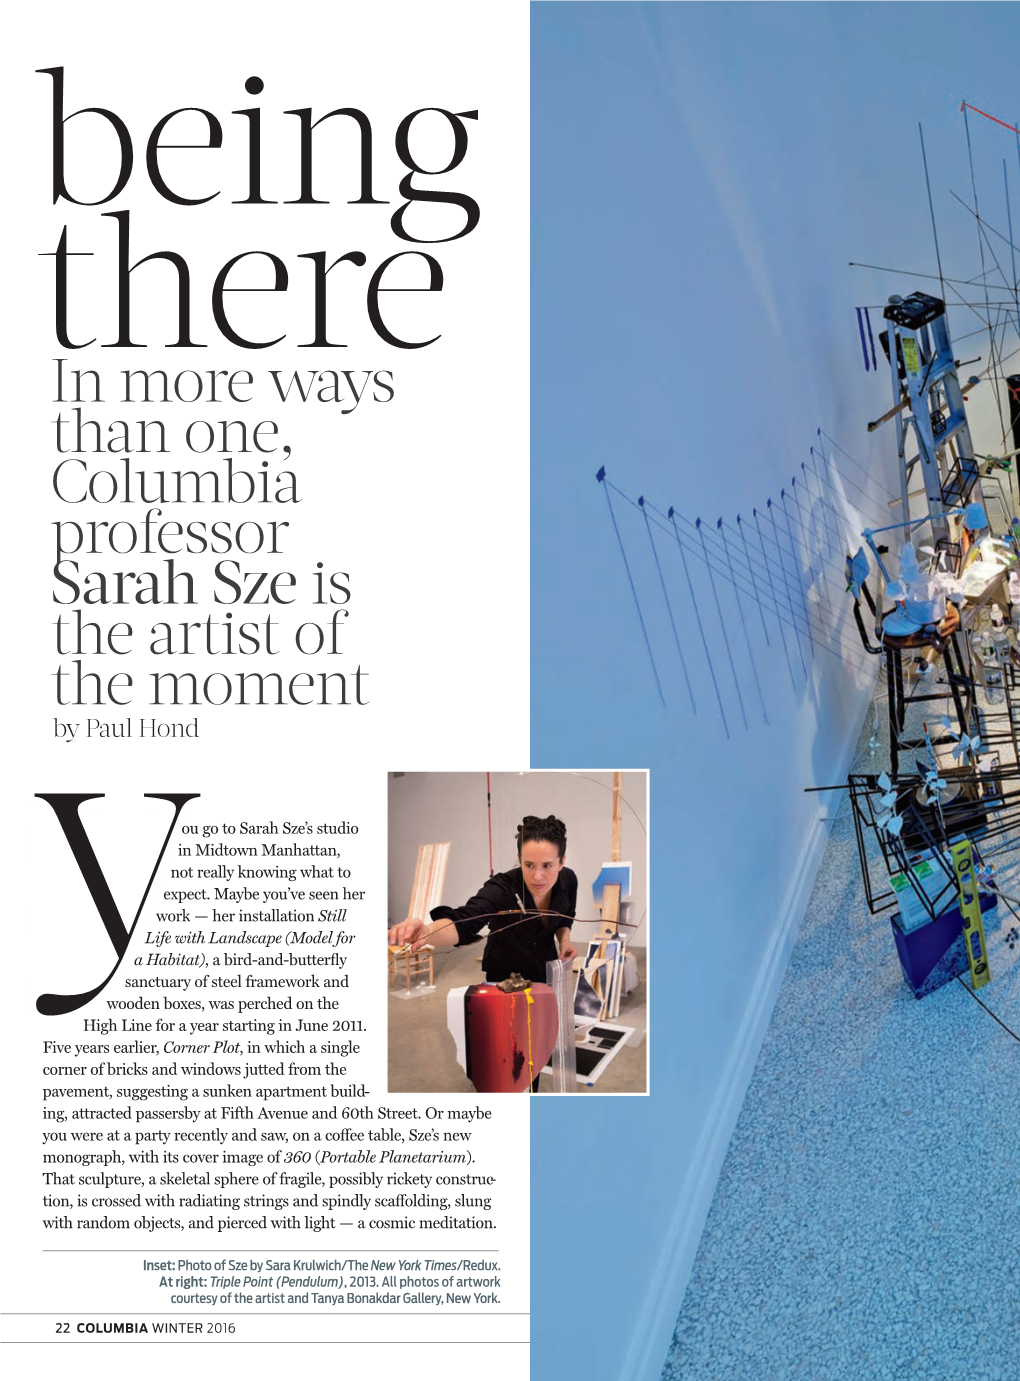 In More Ways Than One, Columbia Professor Sarah Sze Is the Artist of the Moment by Paul Hond